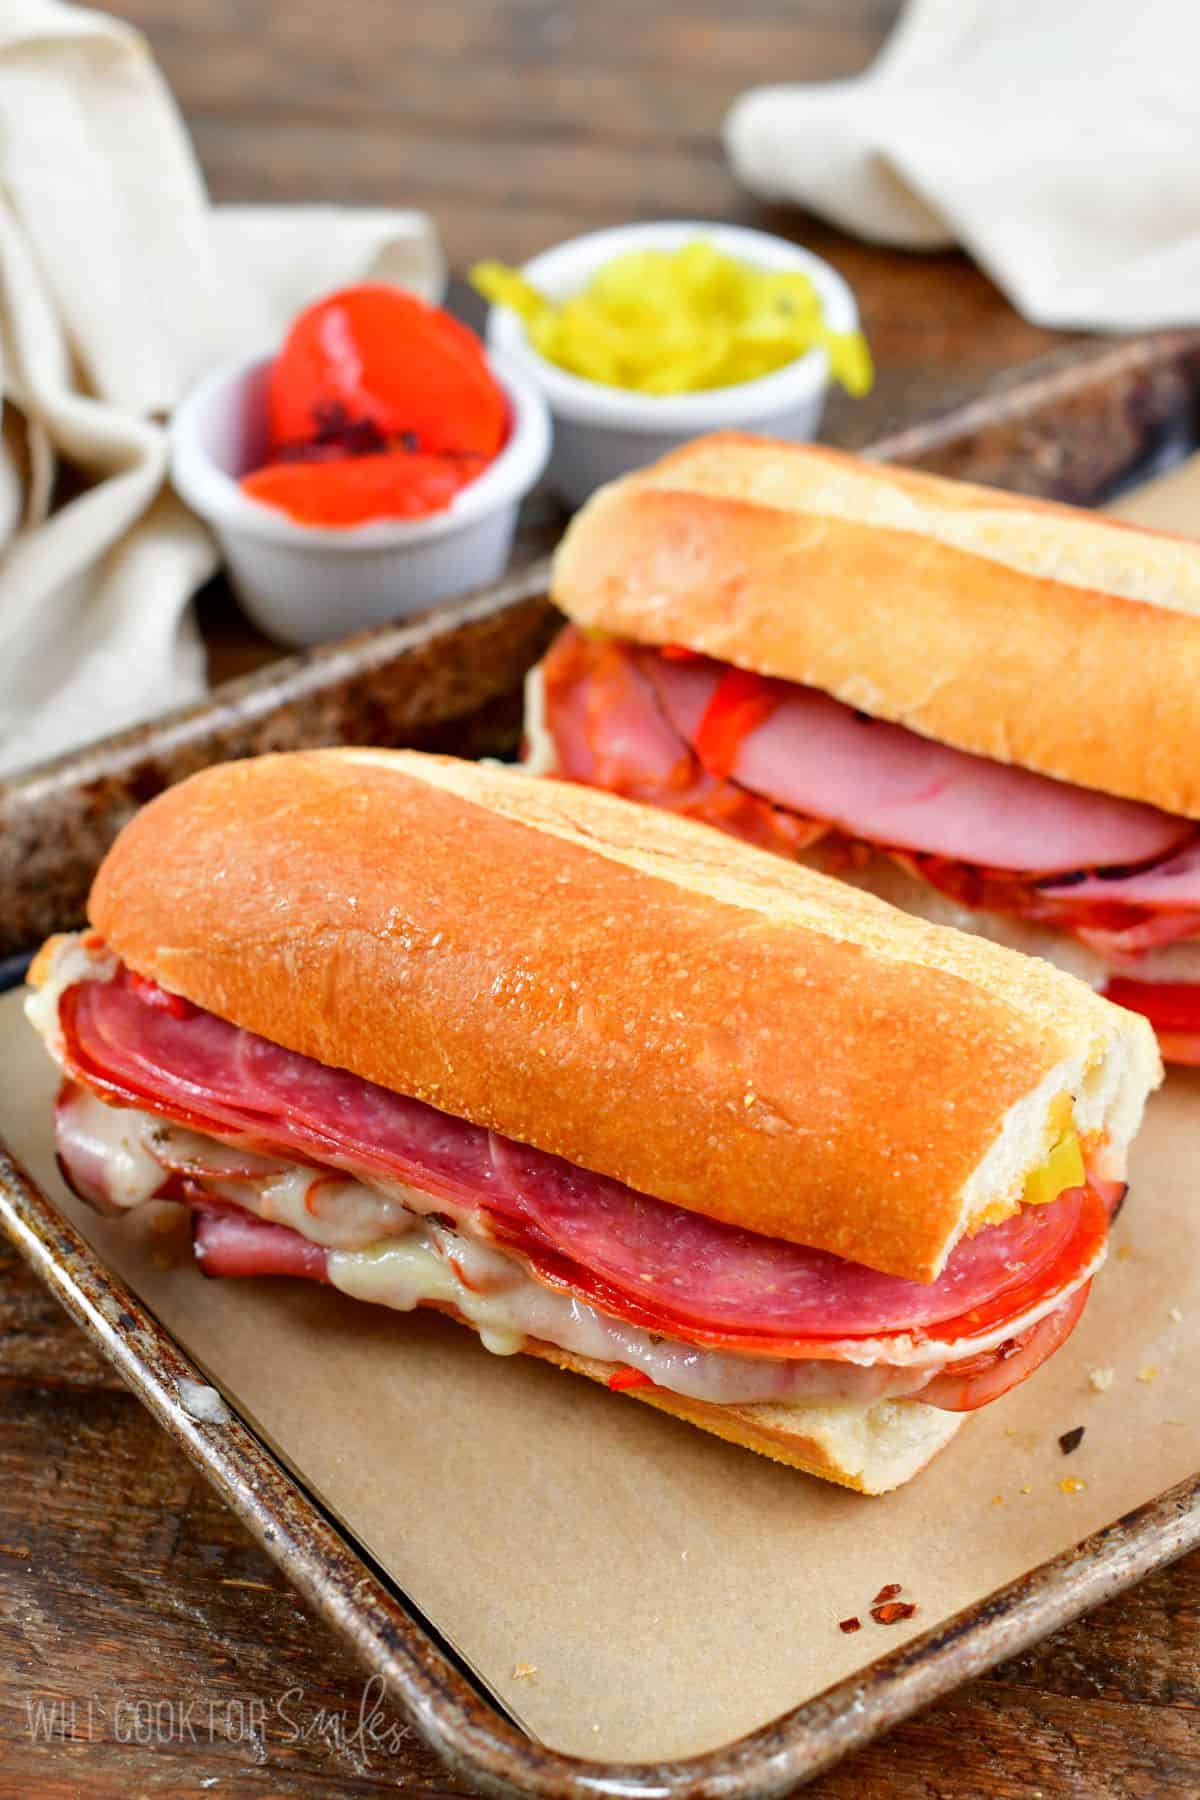 Two Italian subs on a baking sheet lined with parchment paper.